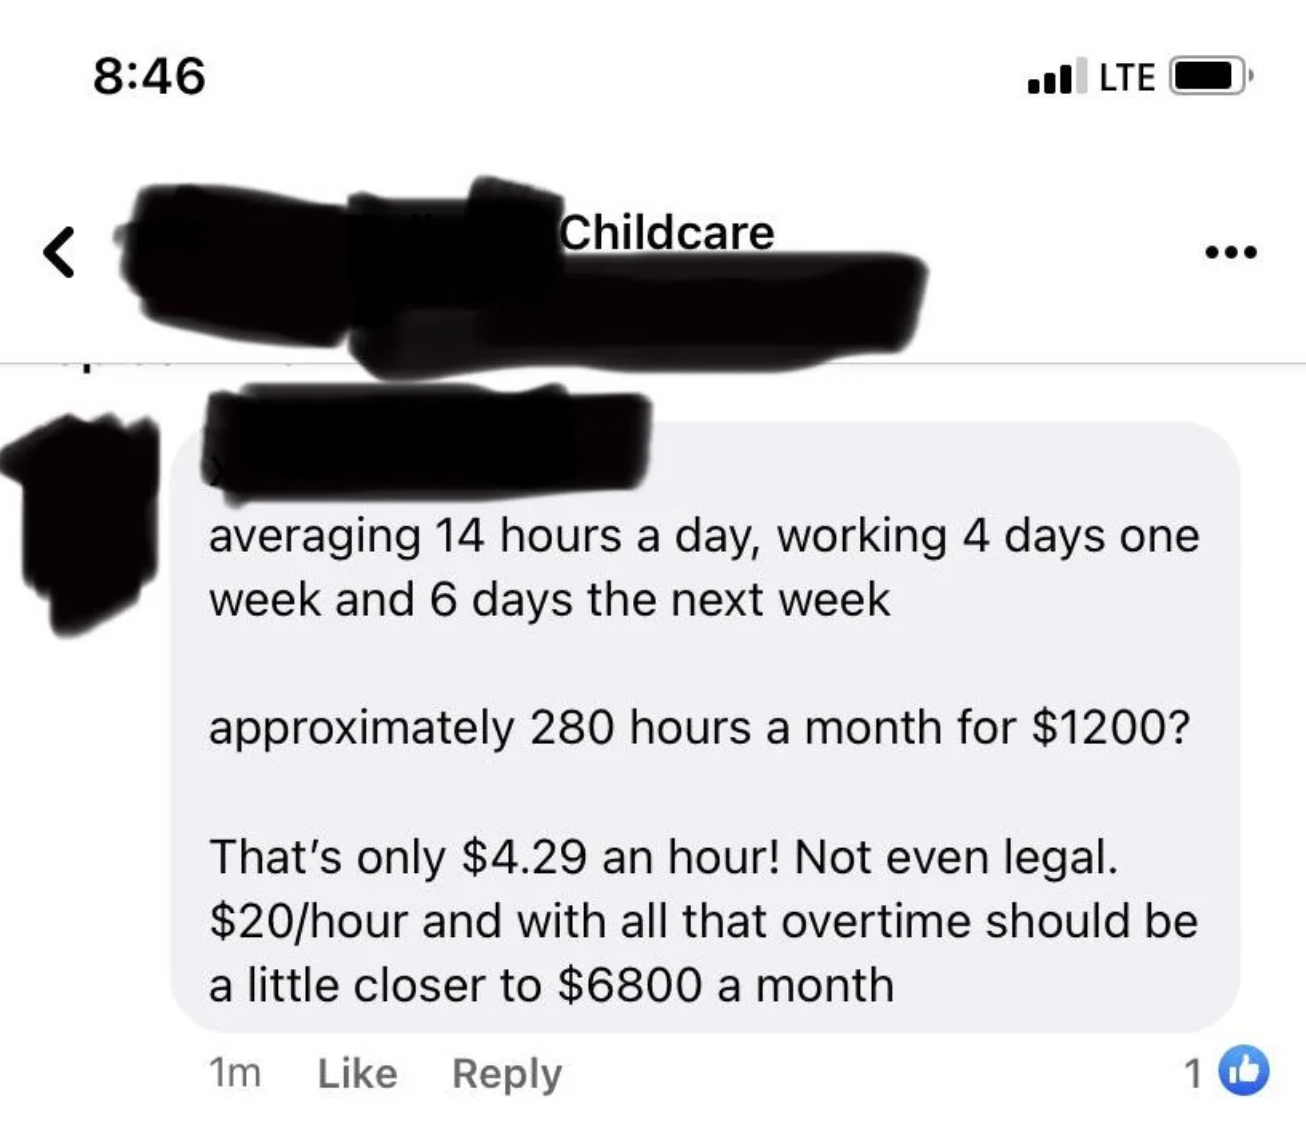 &quot;approximately 280 hours a month for $1200?&quot;